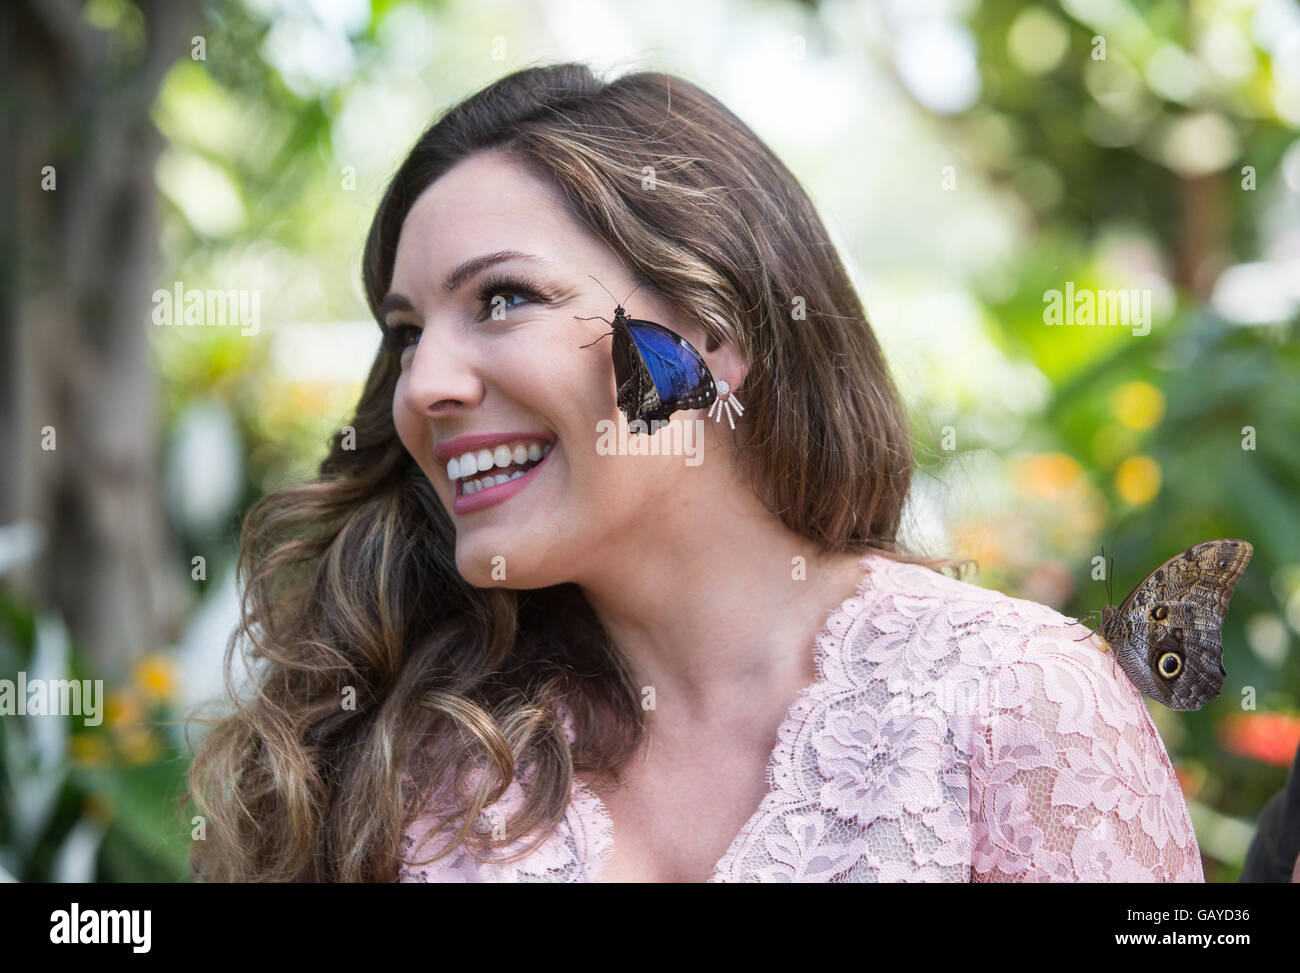 Actress,TV presenter and model in the butterfly Dome at RHS Hampton Court.She poses with a butterfly on her face Stock Photo